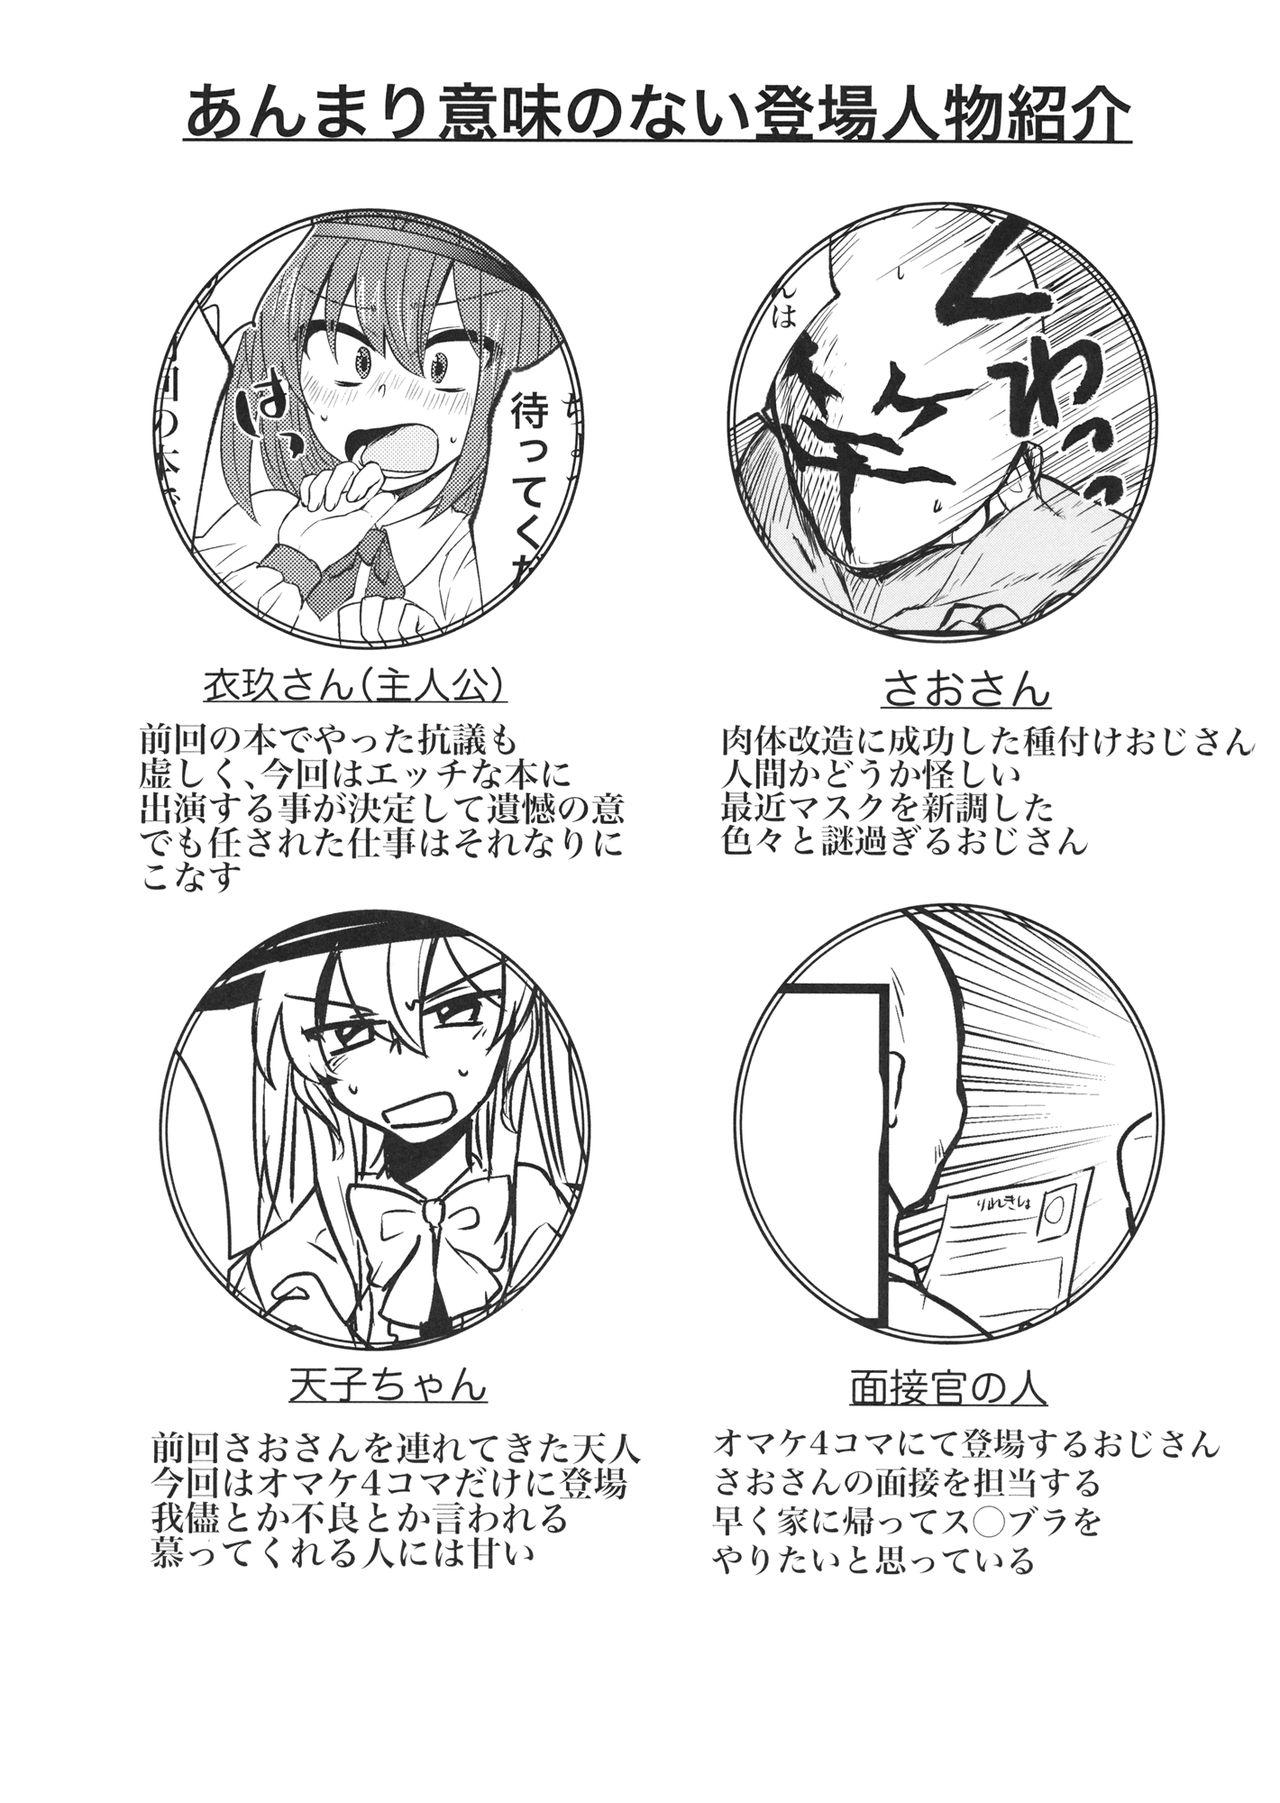 Private 衣玖さんと一緒に色々頑張る本 - Touhou project Facial - Page 2